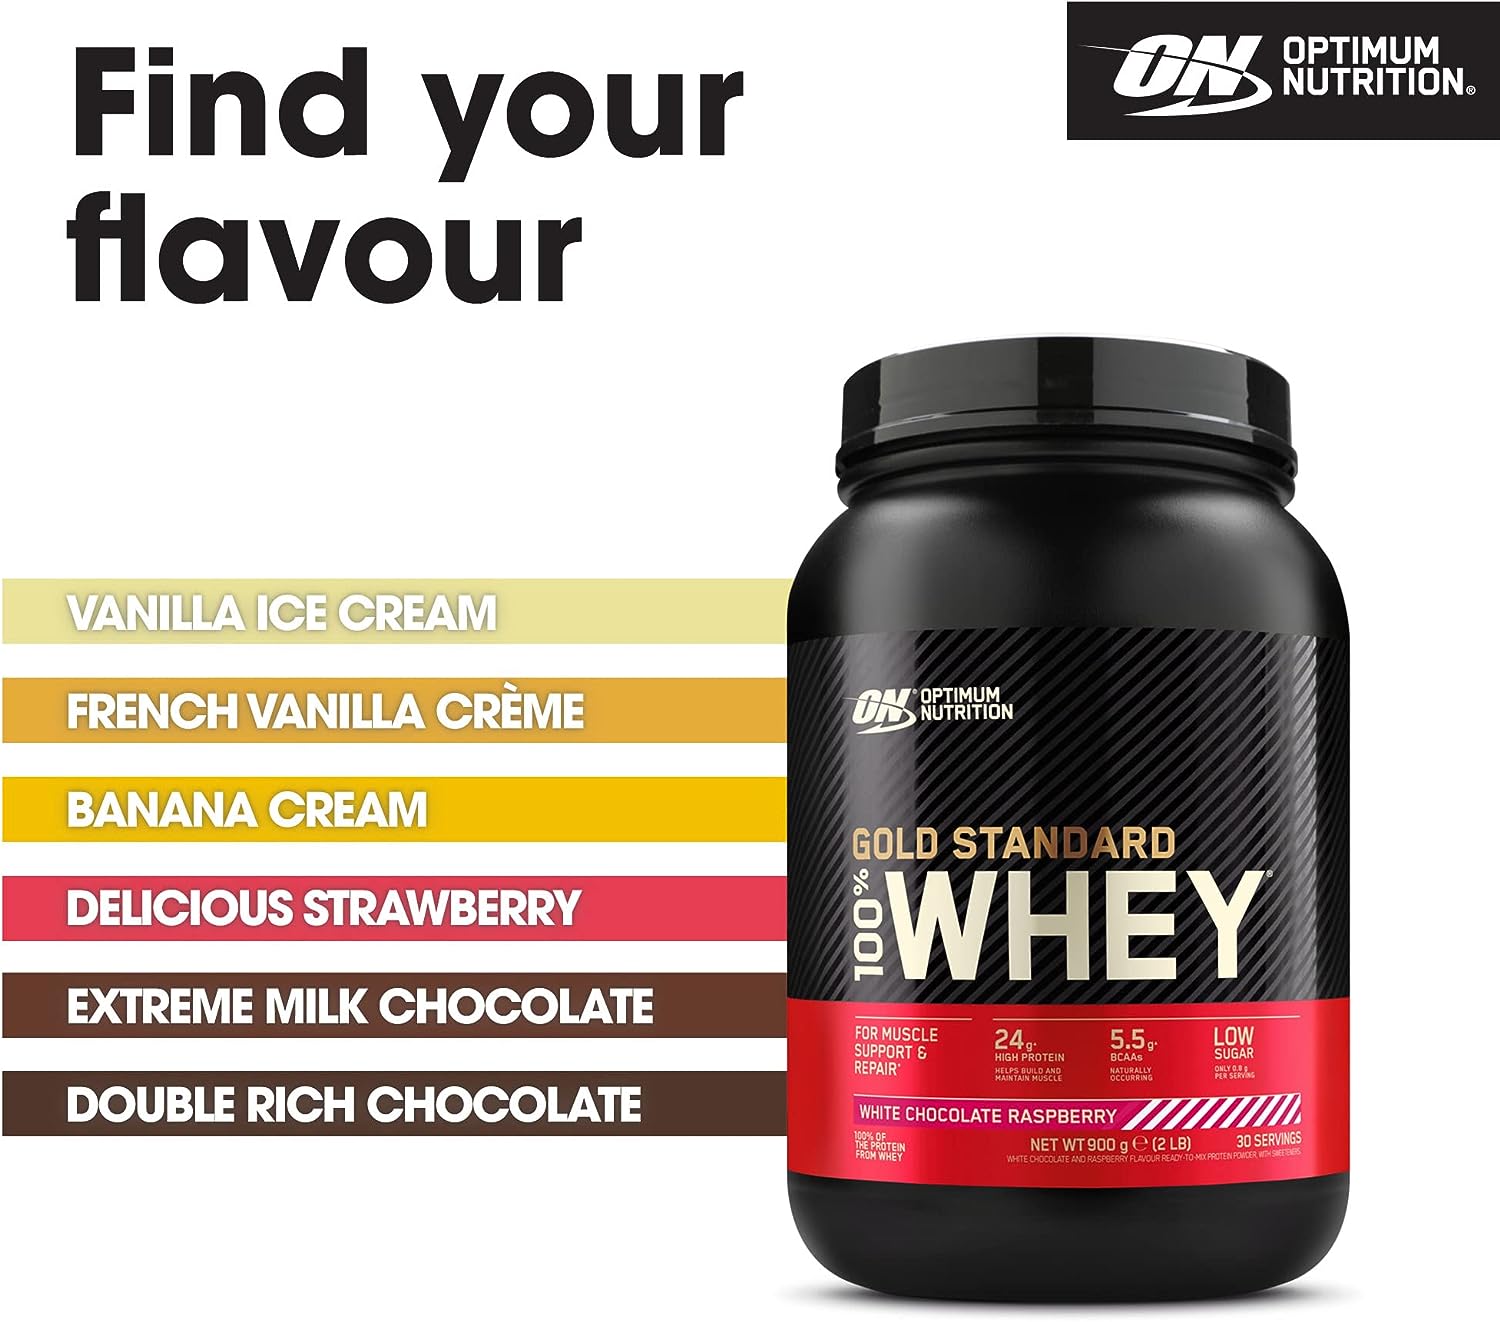 Optimum Nutrition Gold Standard 100% Whey Muscle Building and Recovery Protein Powder With Naturally Occurring Glutamine and BCAA Amino Acids, White Chocolate Raspberry Flavour, 30 Servings, 900 g